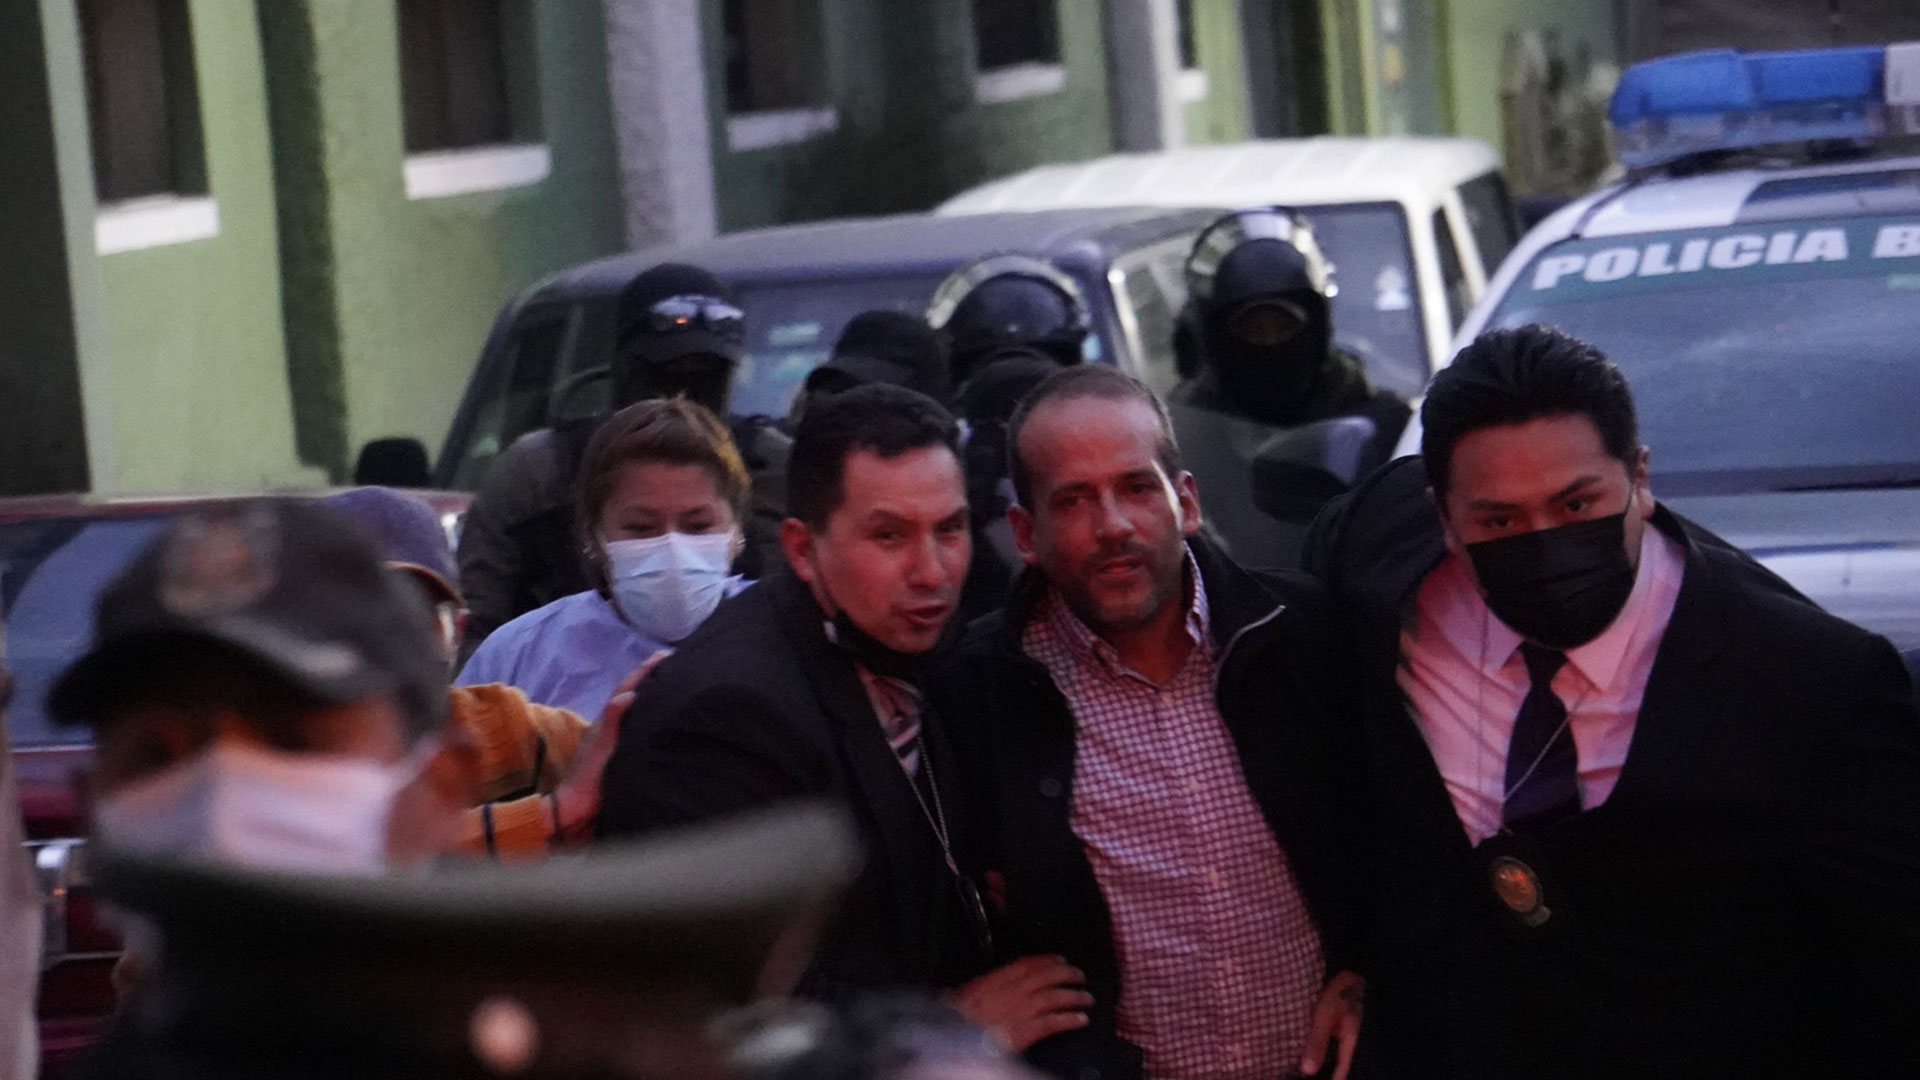 Camacho enters the offices of the Special Force to Fight Crime (Felcc) with plainclothes police officers on December 28, 2022 in La Paz (EFE/Javier Mamani)